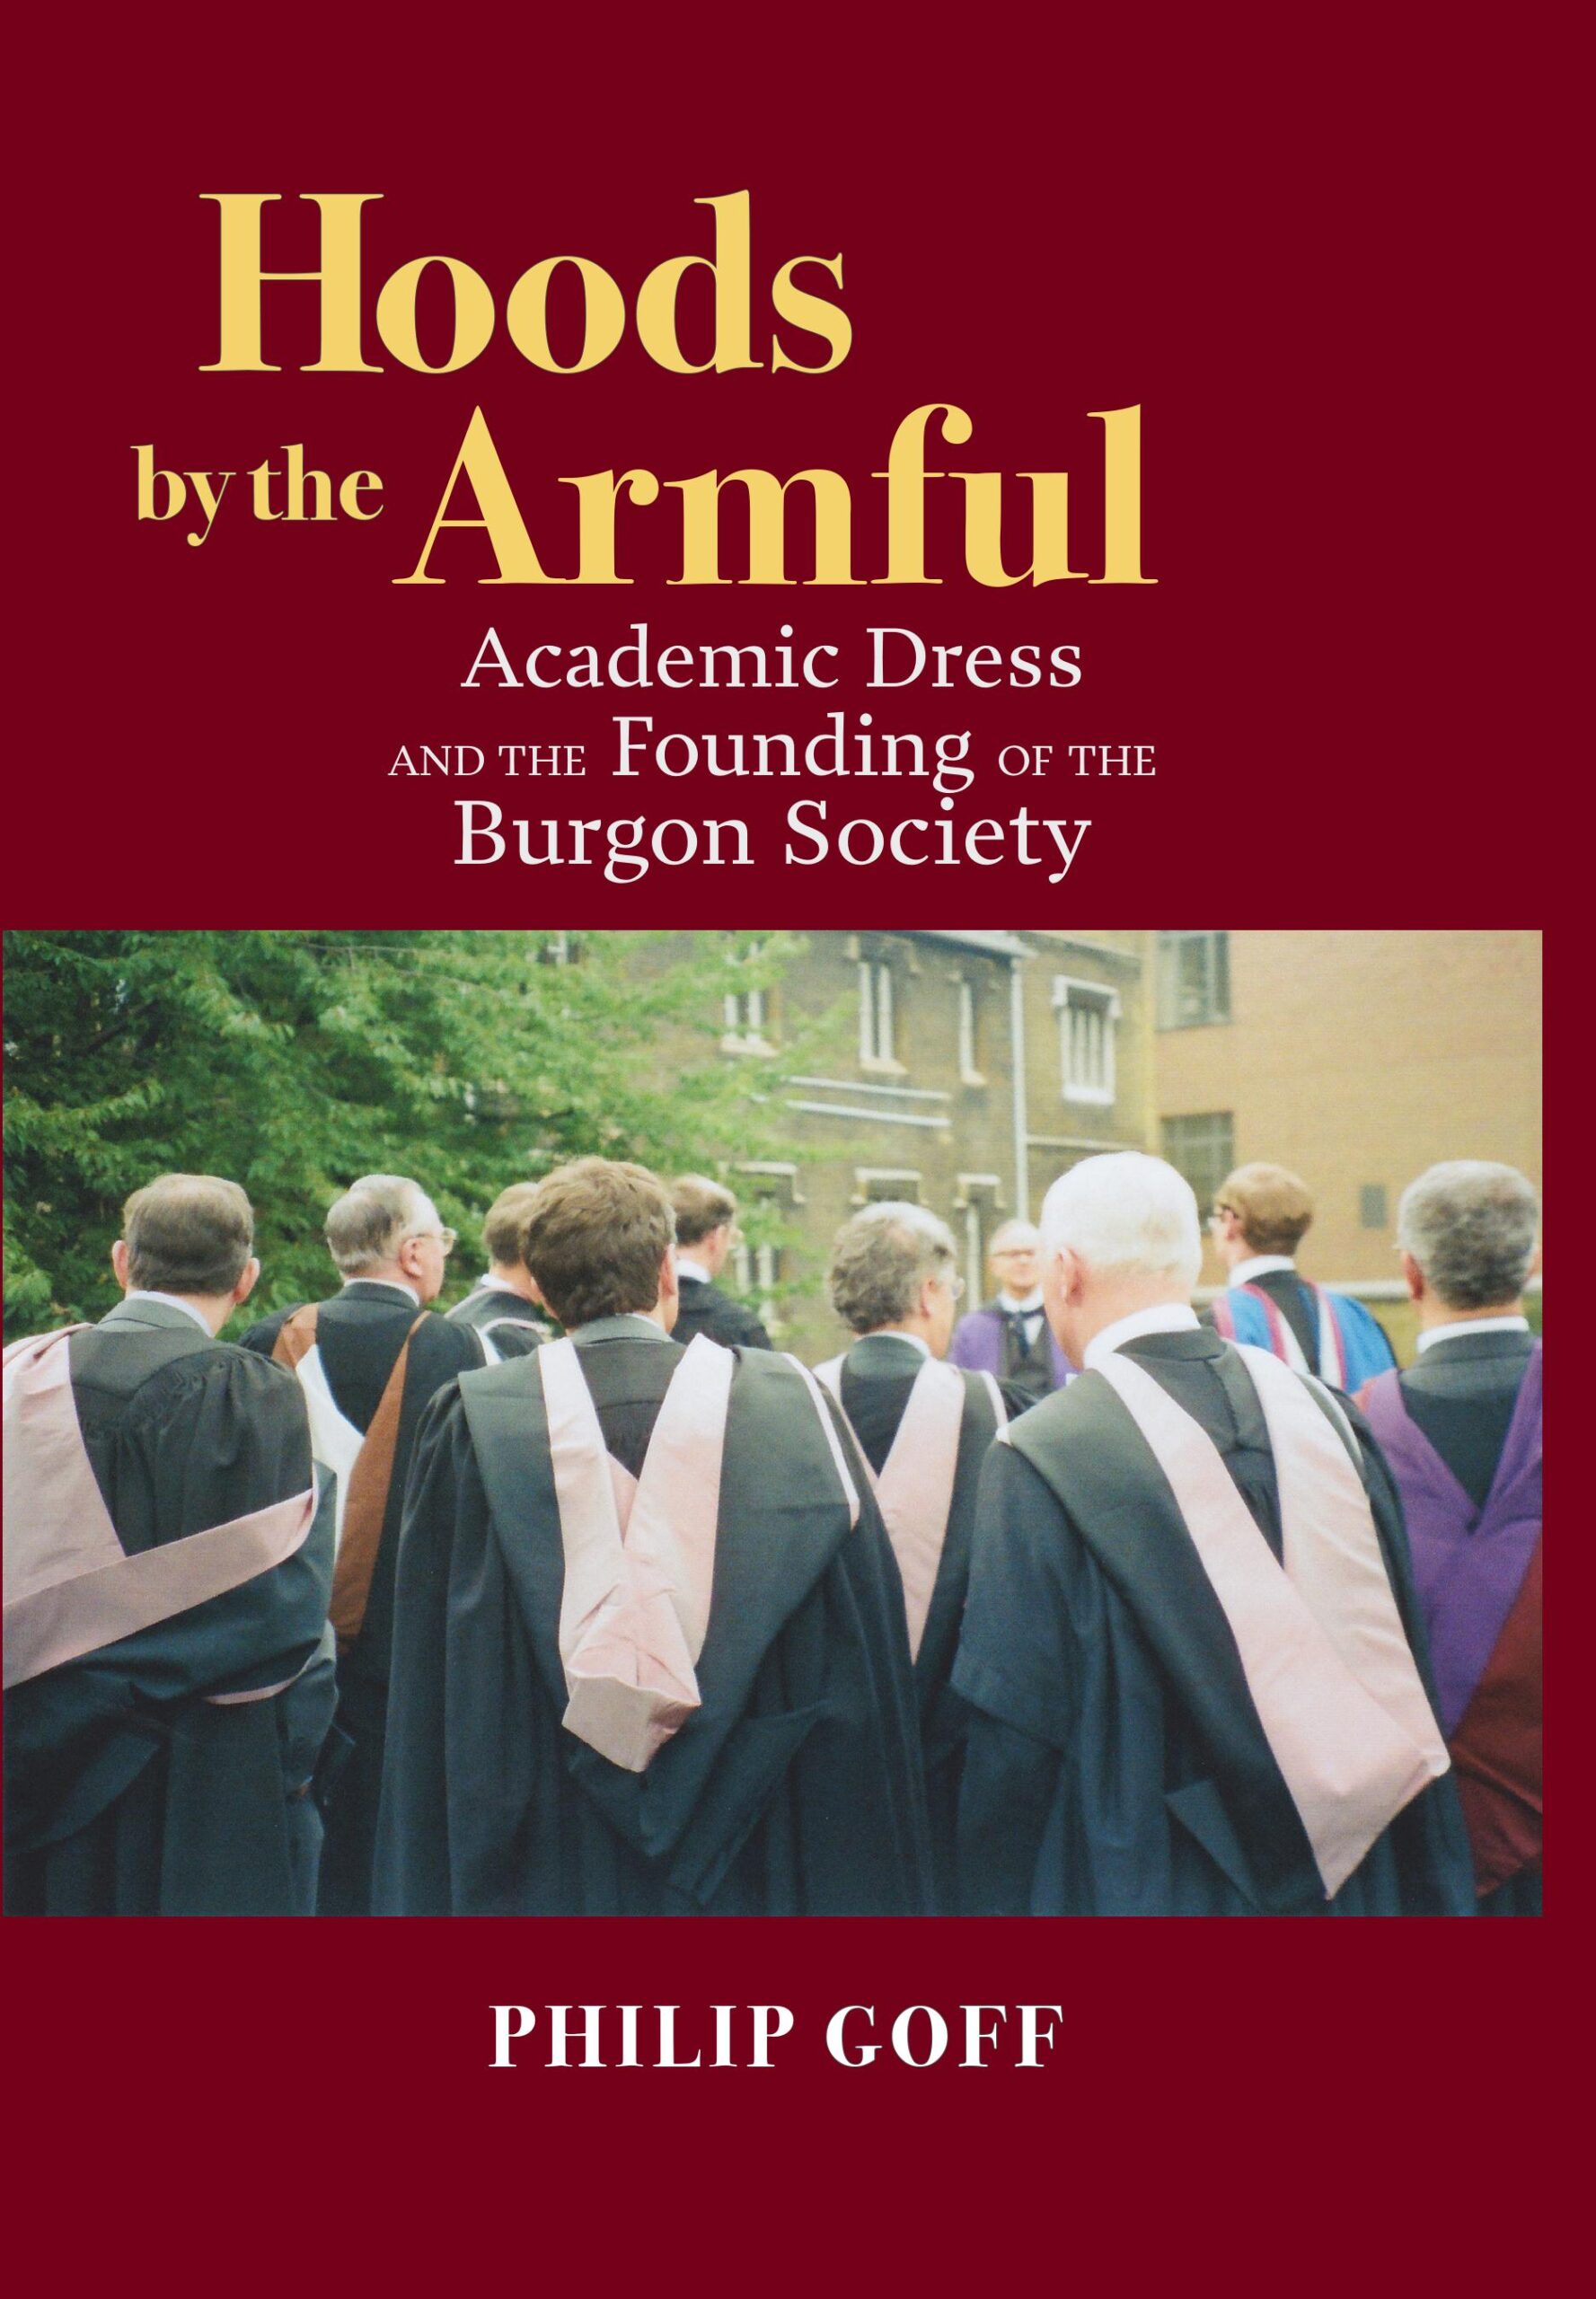 Hoods by the Armful: Academic Dress and the founding of the Burgon Society